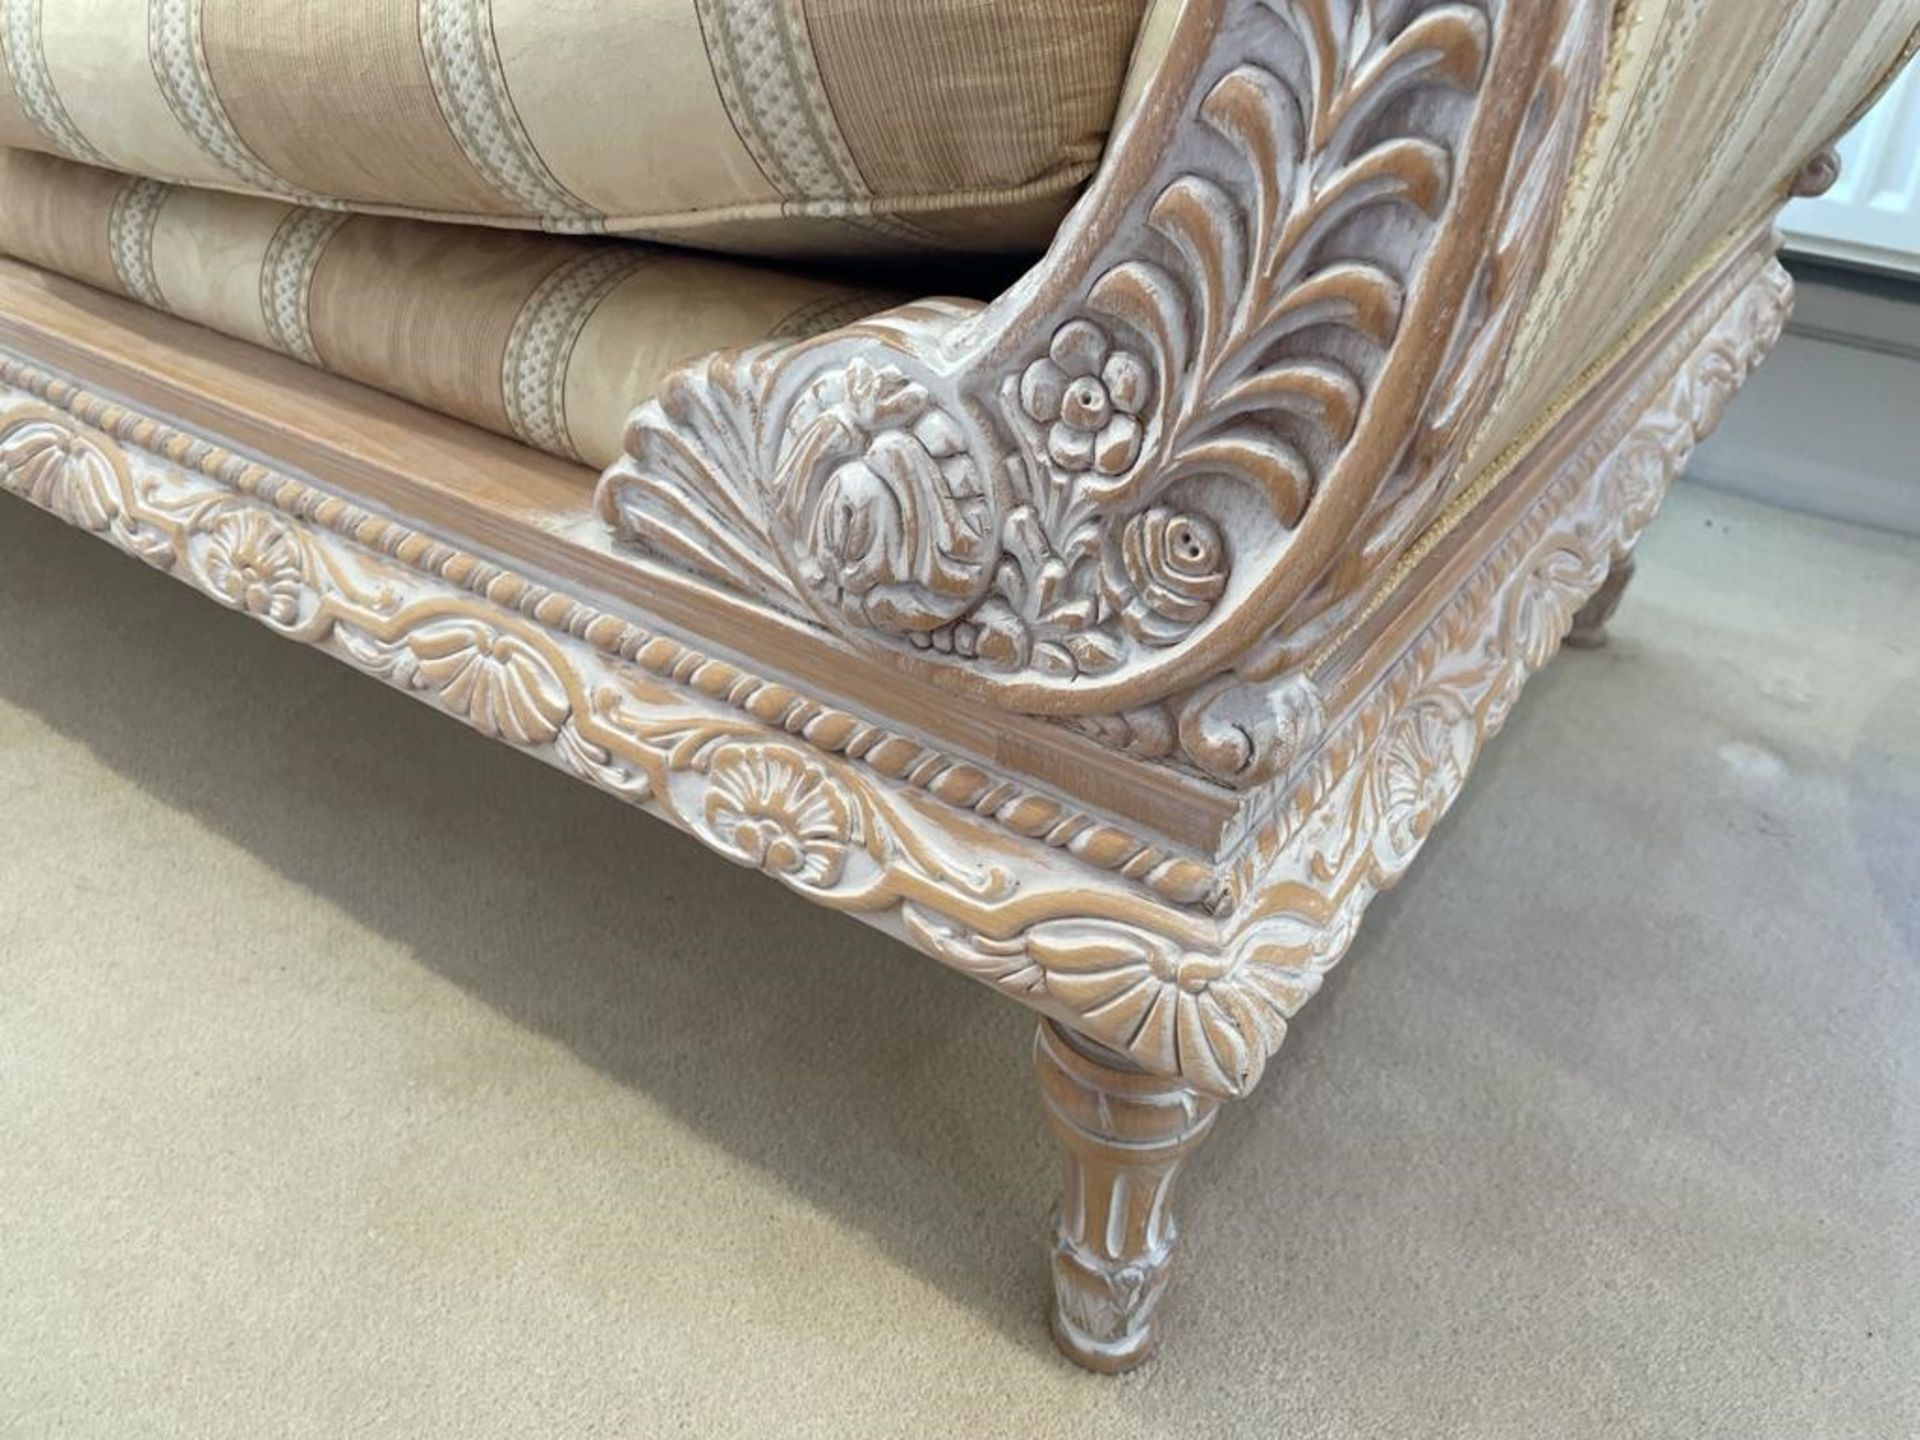 1 x French 19th Century Provincial Style Three Piece Sofa and Chair Set With Beautifully Carved Wood - Image 29 of 41